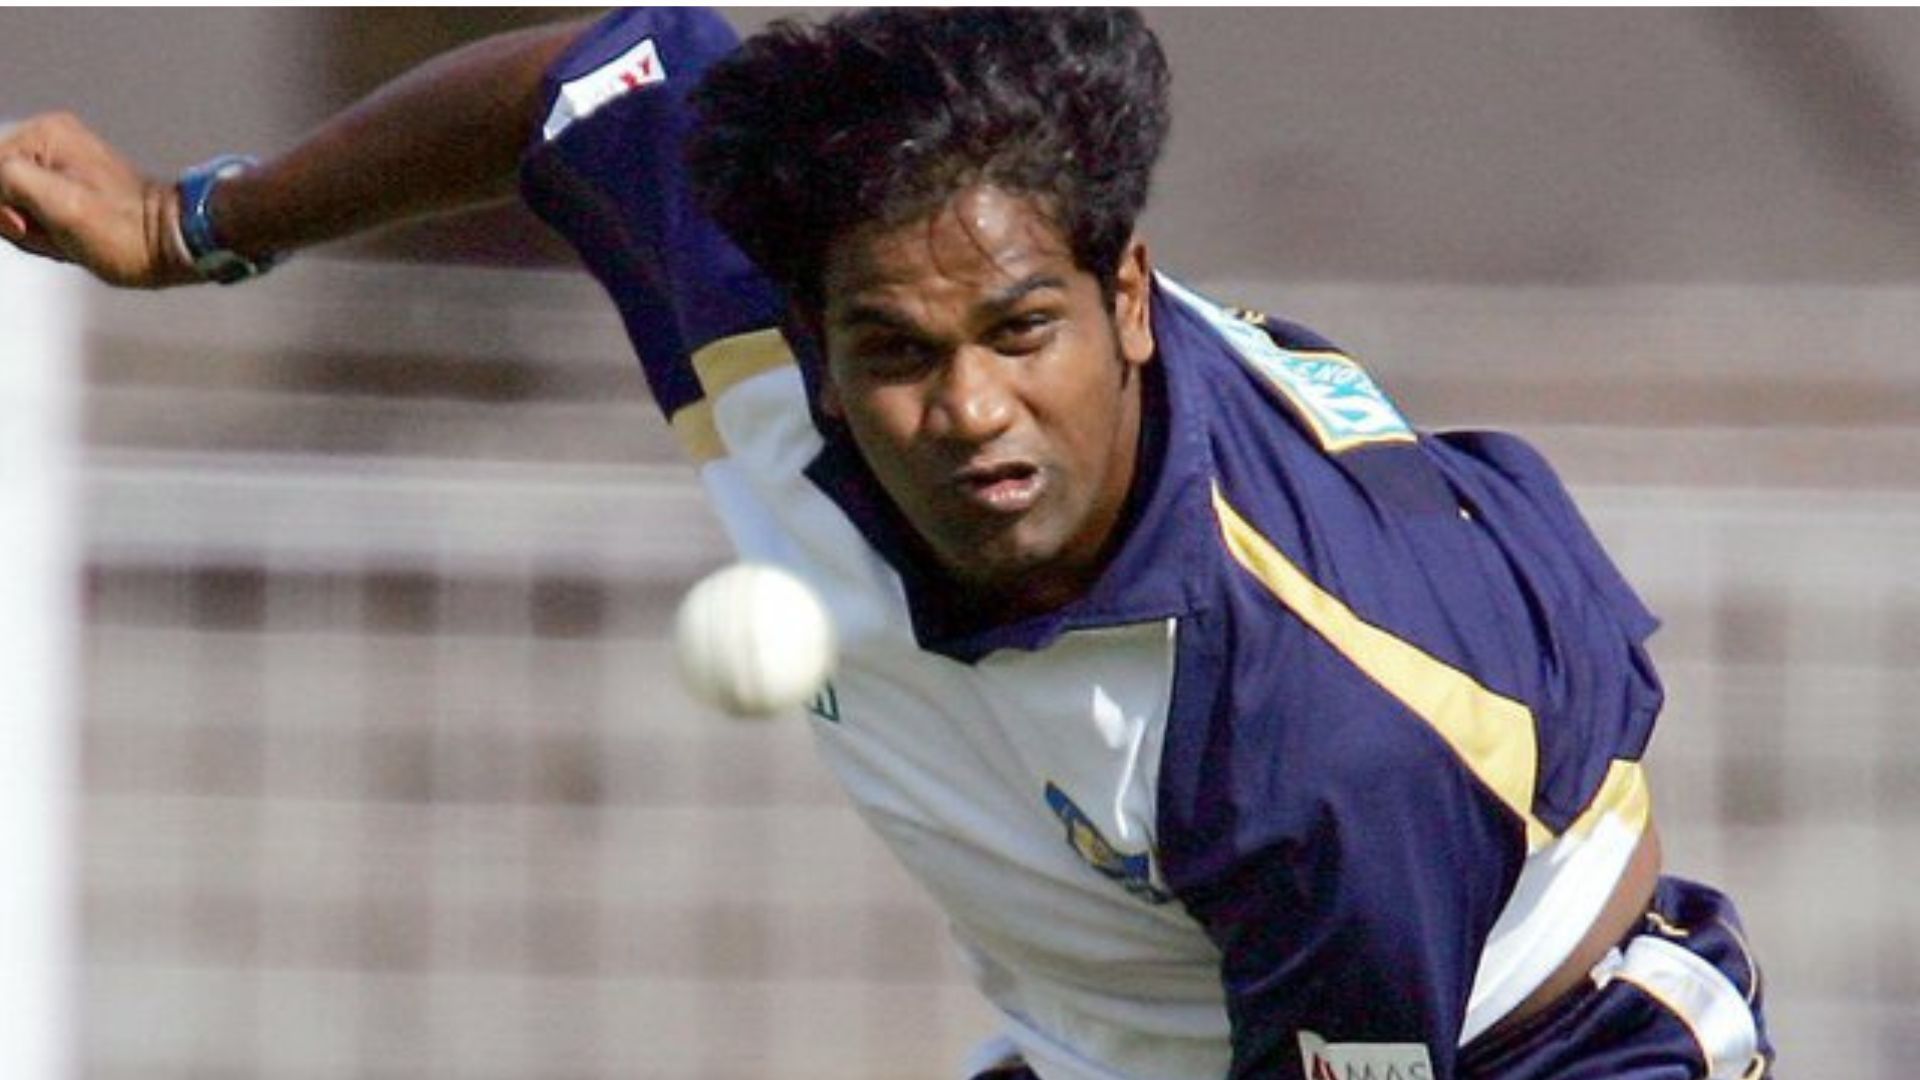 Nuwan Zoysa played 3 matches for the Deccan Chargers between 2008-09.